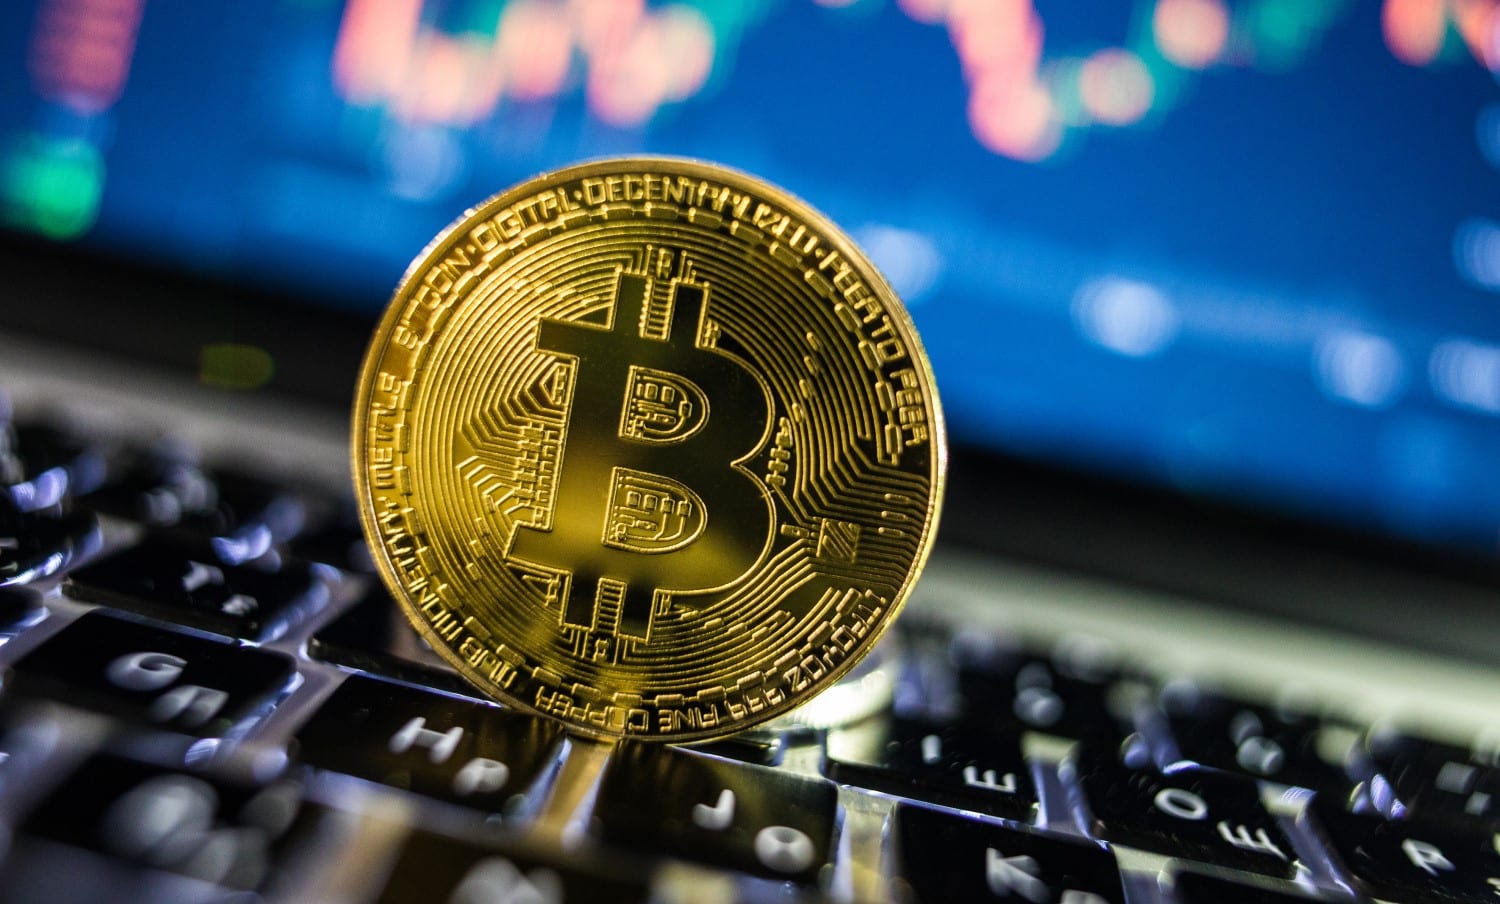 Don’t Be Surprised If Bitcoin Price Corrects 30% from Here Says Crypto Analyst